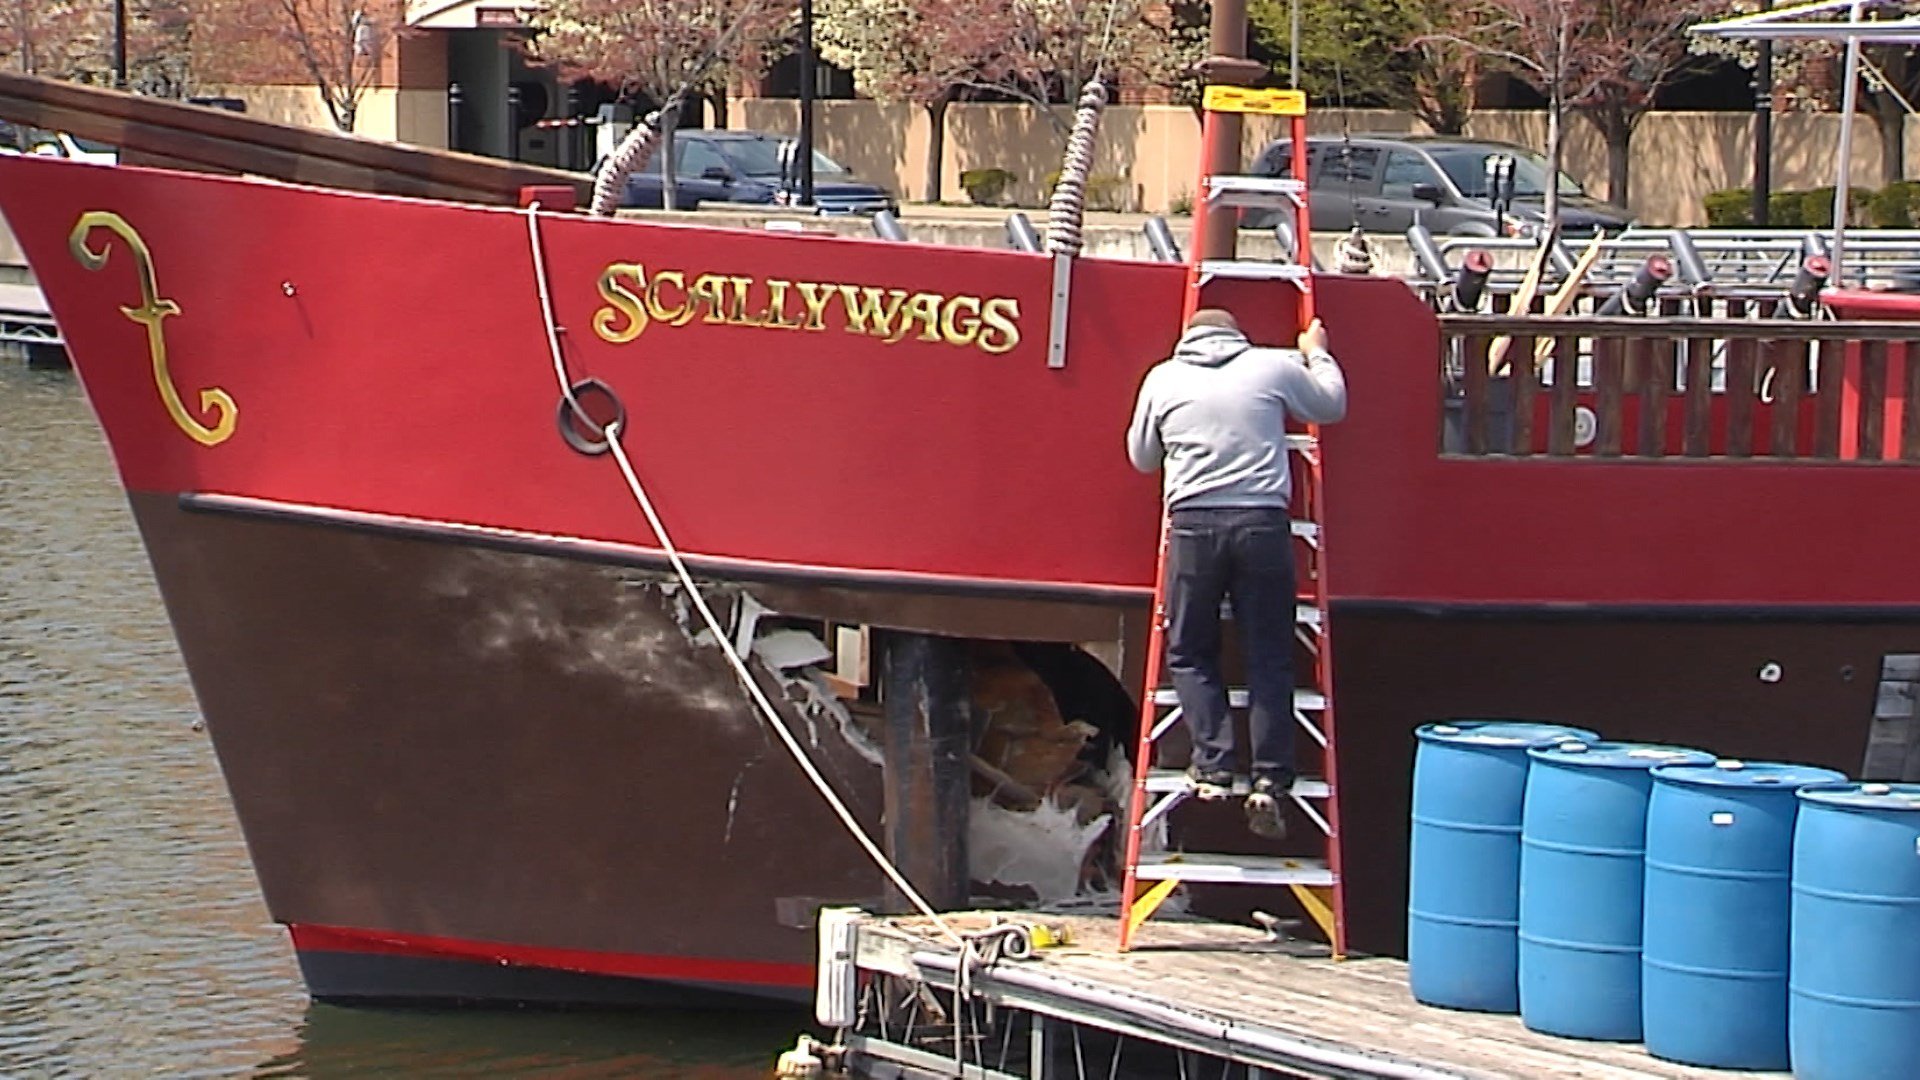 Scallywags Pirate Ship Damaged By Piling